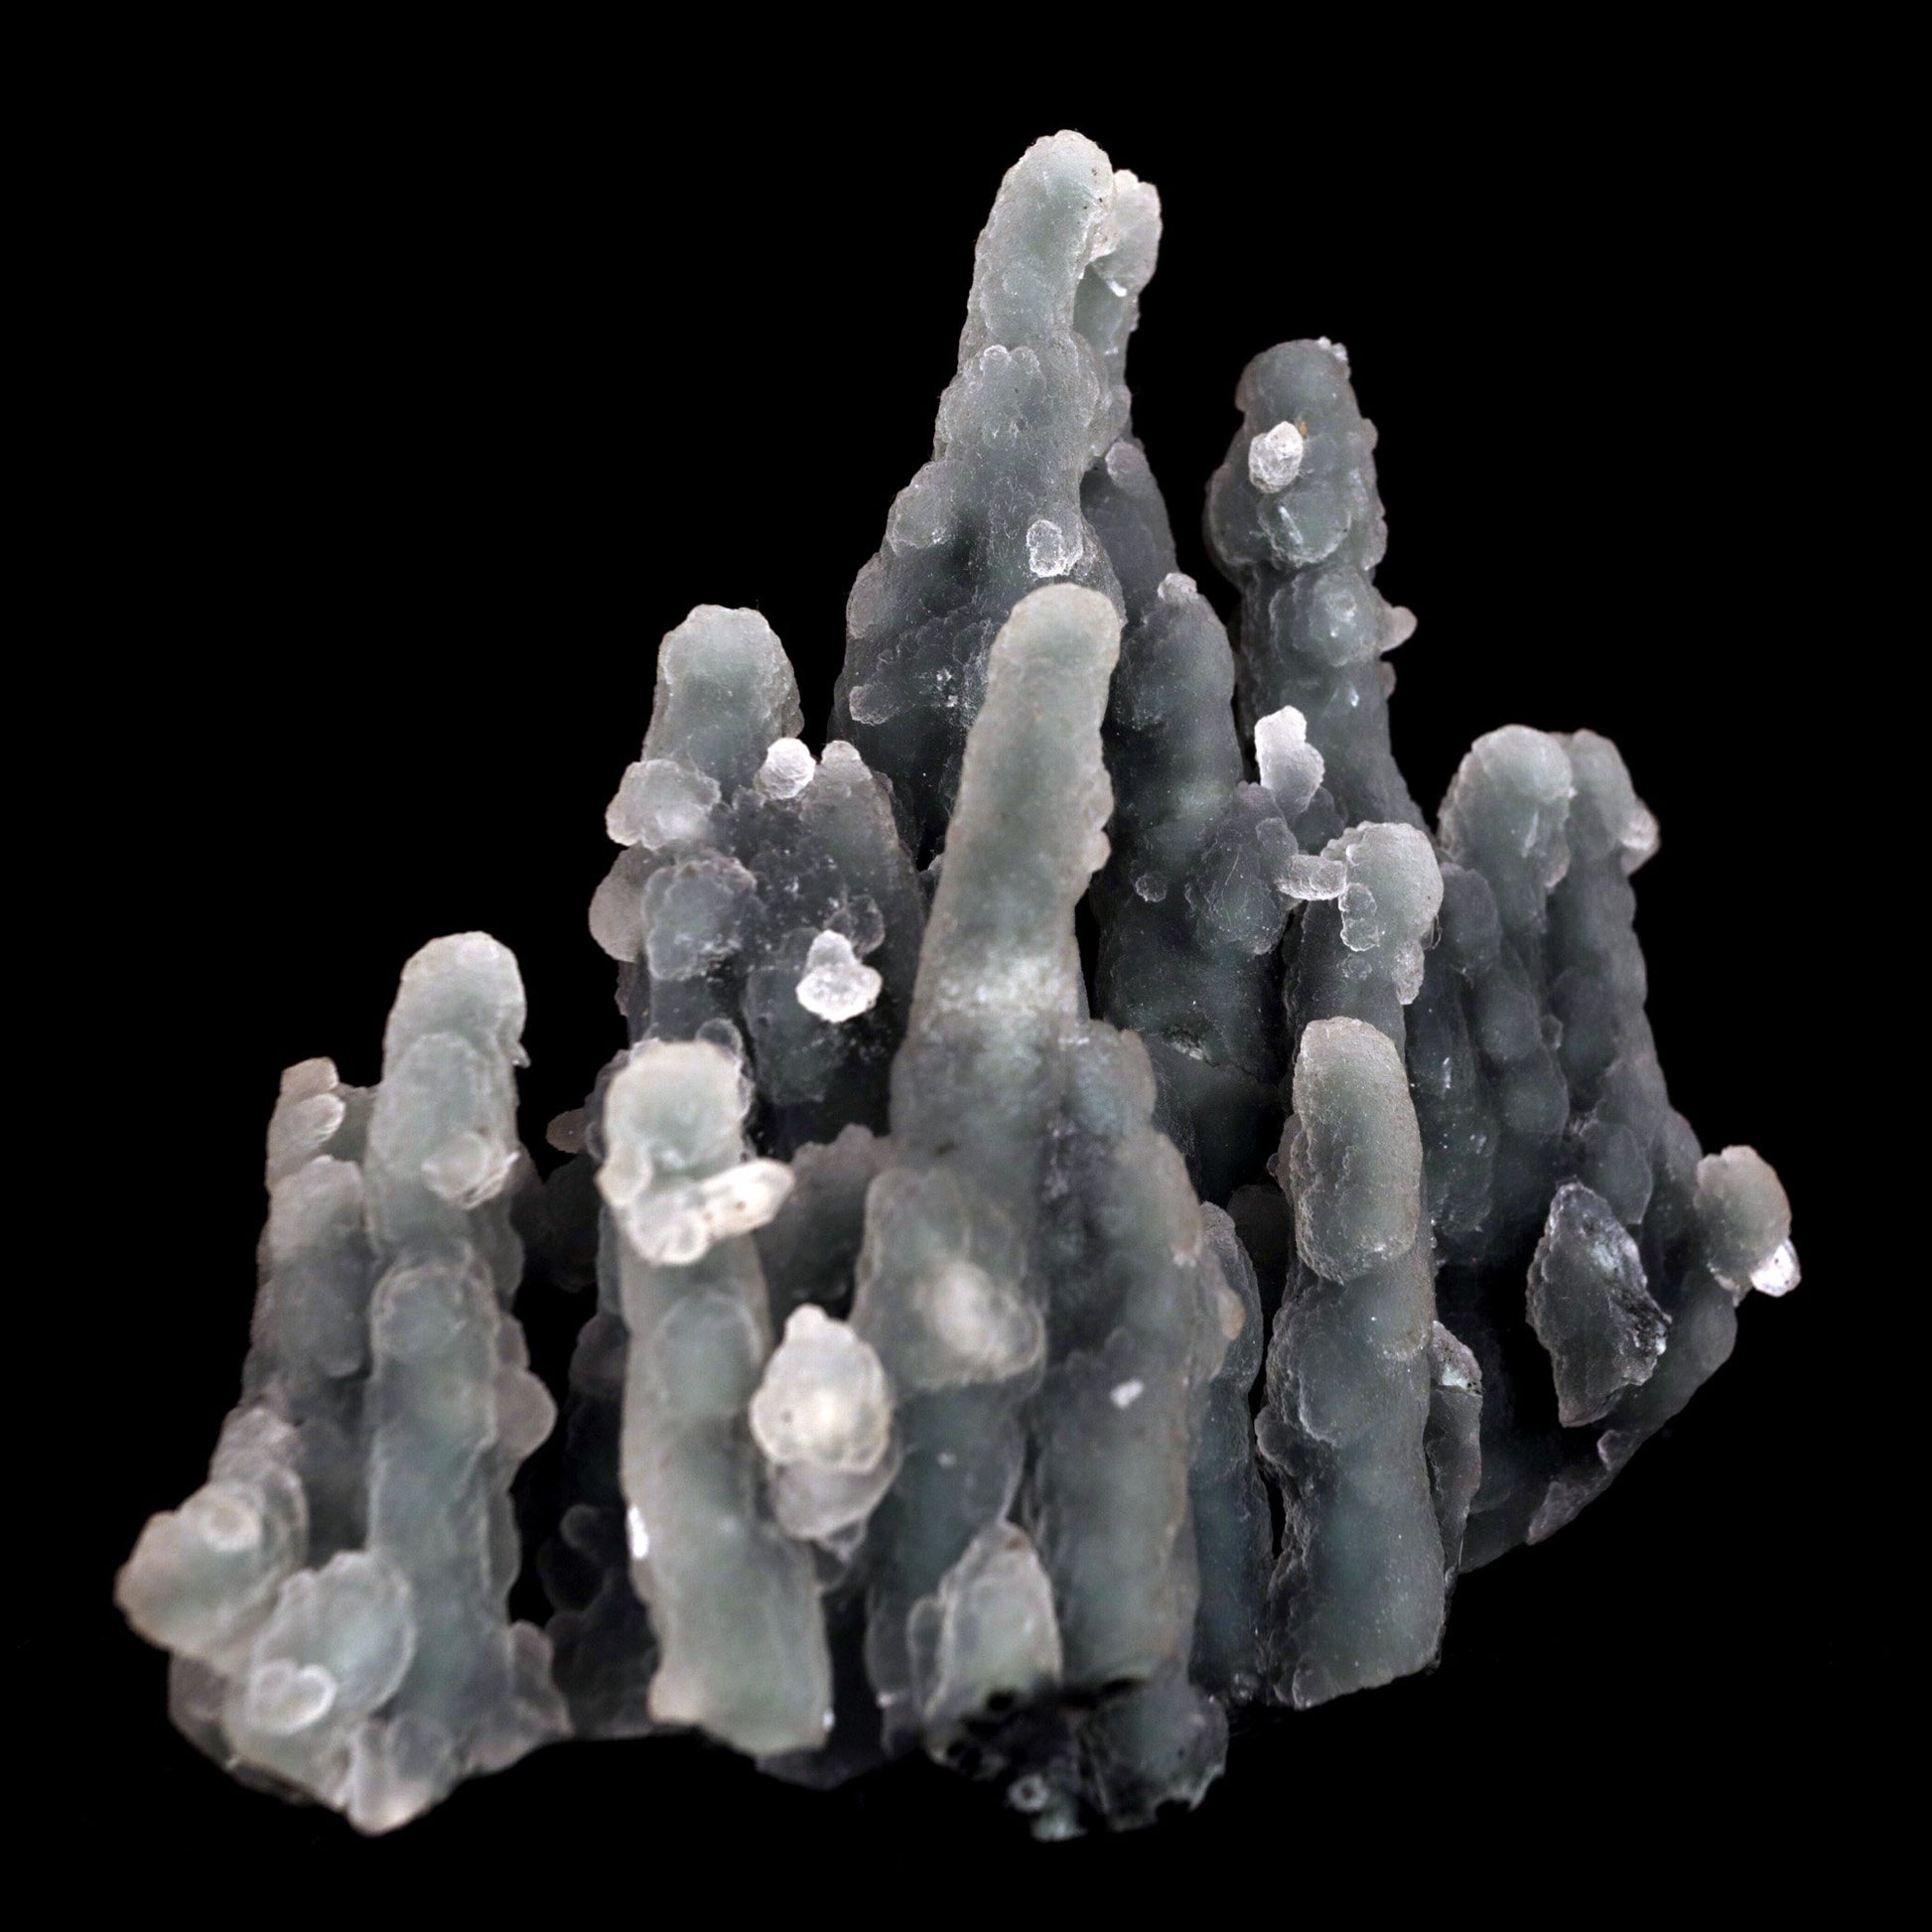 Chalcedony Coral Natural Mineral Specimen # B 4831  https://www.superbminerals.us/products/chalcedony-coral-natural-mineral-specimen-b-4831  Features: Magnificent specimen of delicate Chalcedony stalactites. The Chalcedony elongated structure is amazing. The stalactites are complete all over, colorless with milky white inclusions in the center, very sparkling and frosty. Many of them are doubly terminated. The Chalcedony stalactites are very lustrous